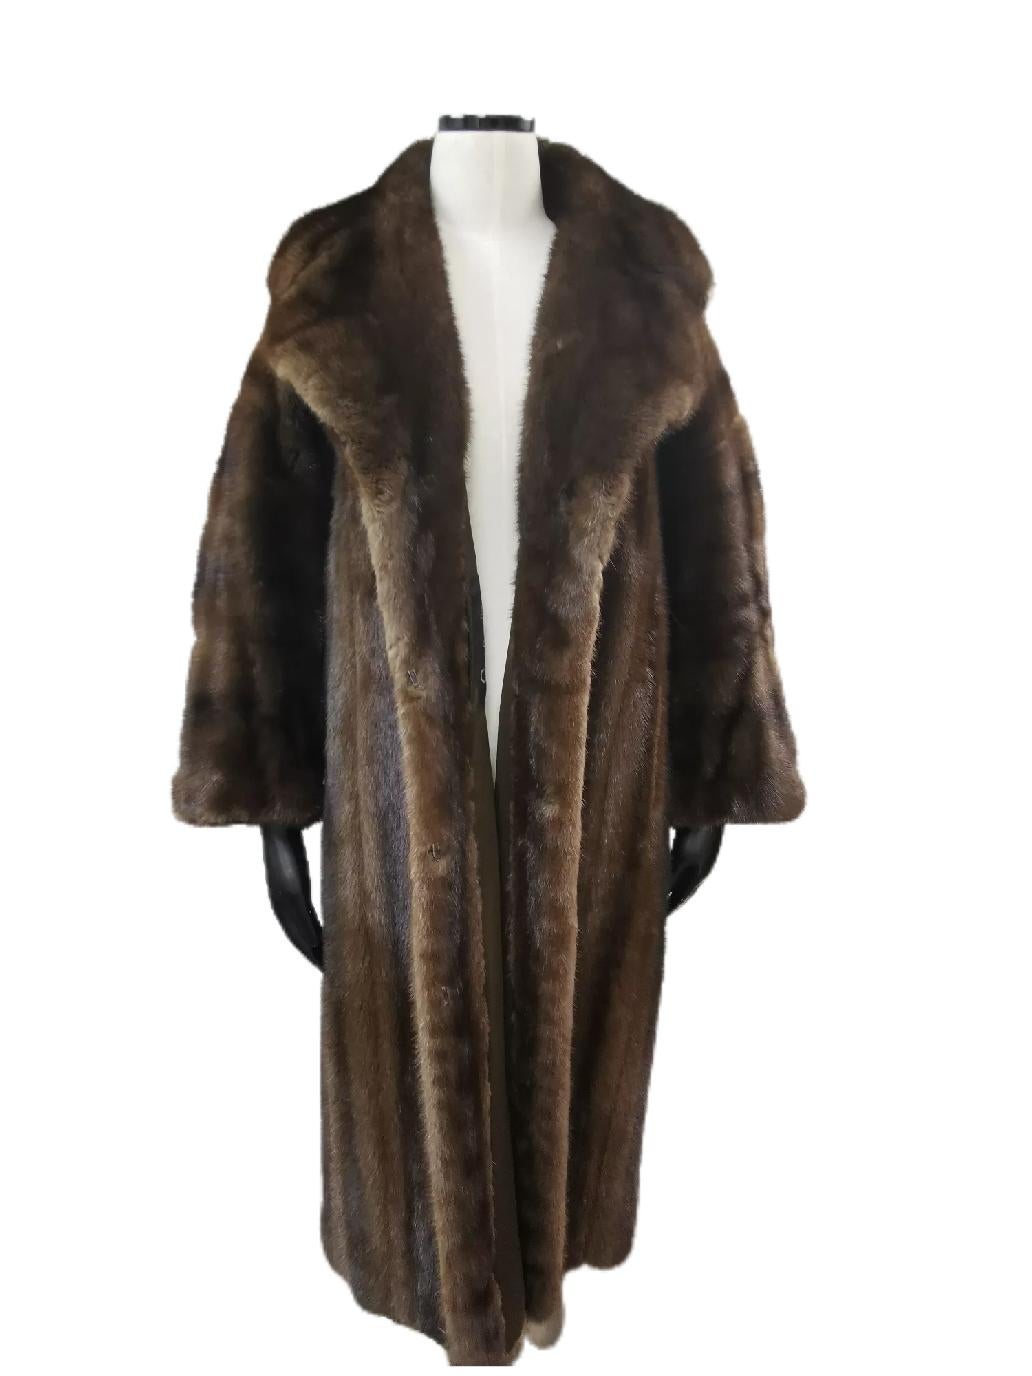 DESCRIPTION : Christian dior mink fur coat size 18

Notch collar, supple skins, short collar, beautiful fresh fur, european german clasps for closure, too slit pockets, nice big full pelts skins in excellent condition.
BRAND: Christian Dior

MADE IN